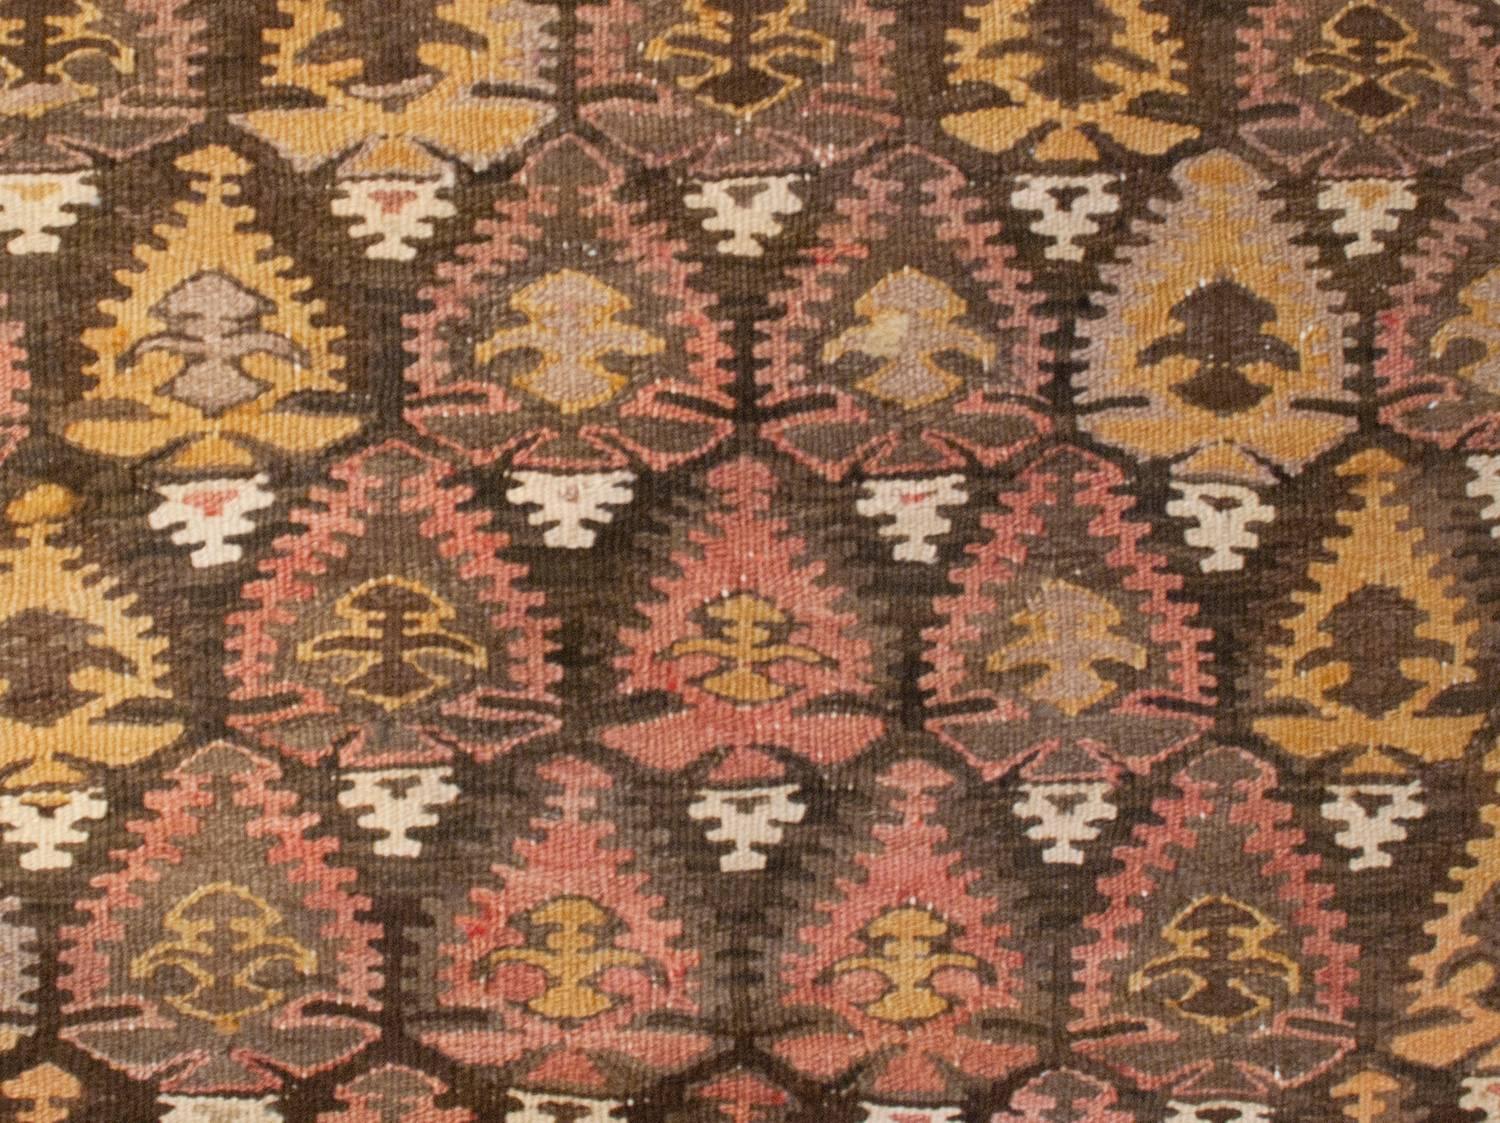 Vegetable Dyed Wonderful Early 20th Century Qazvin Kilim Runner For Sale